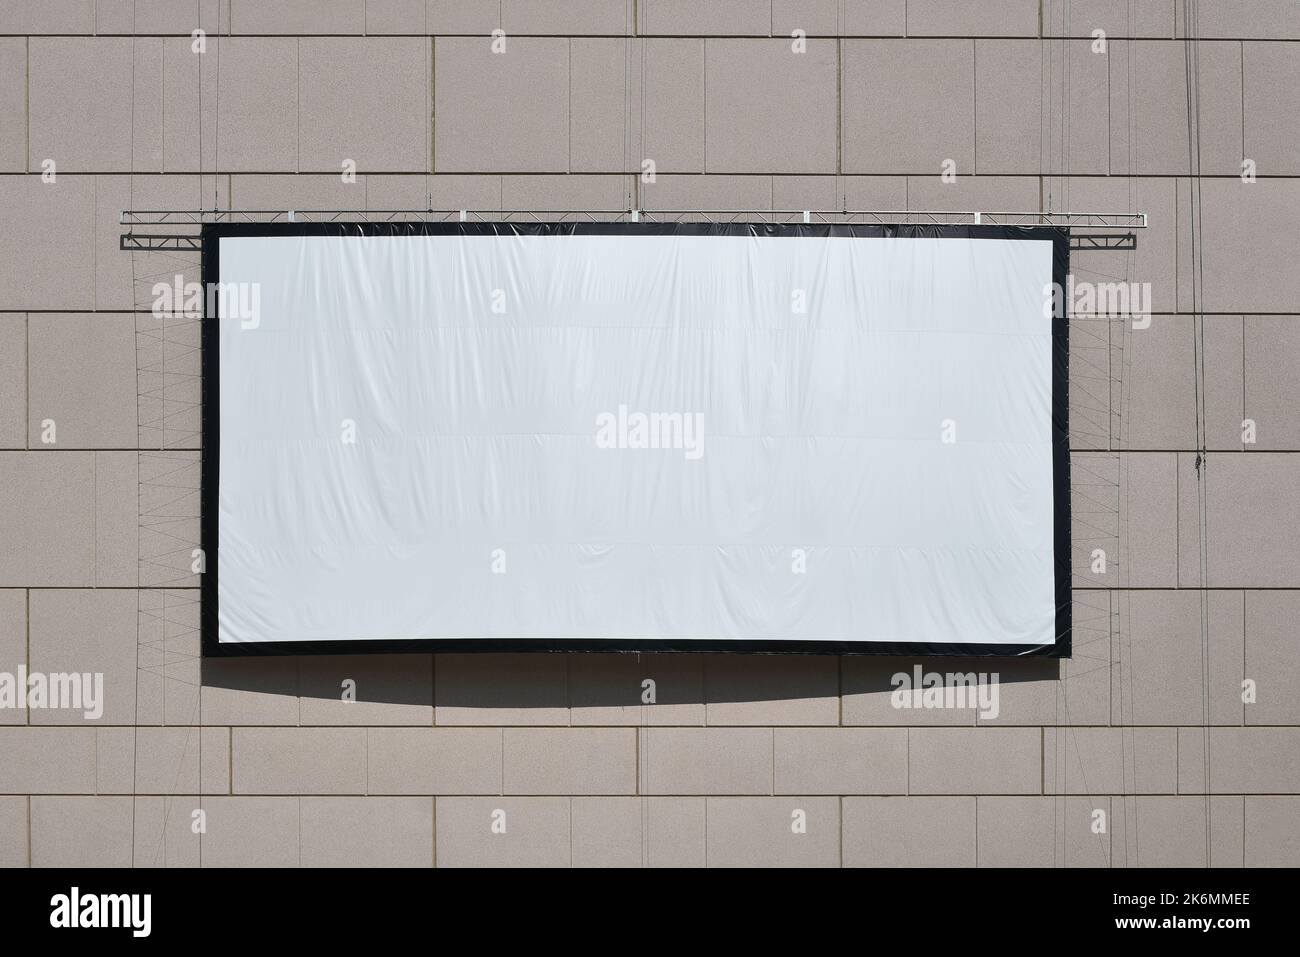 COSTA MESA, CALIFORNIA - 02 OCT 2022: Large Outdoor Projection Screen at the Segerstron Center for the Arts. Stock Photo